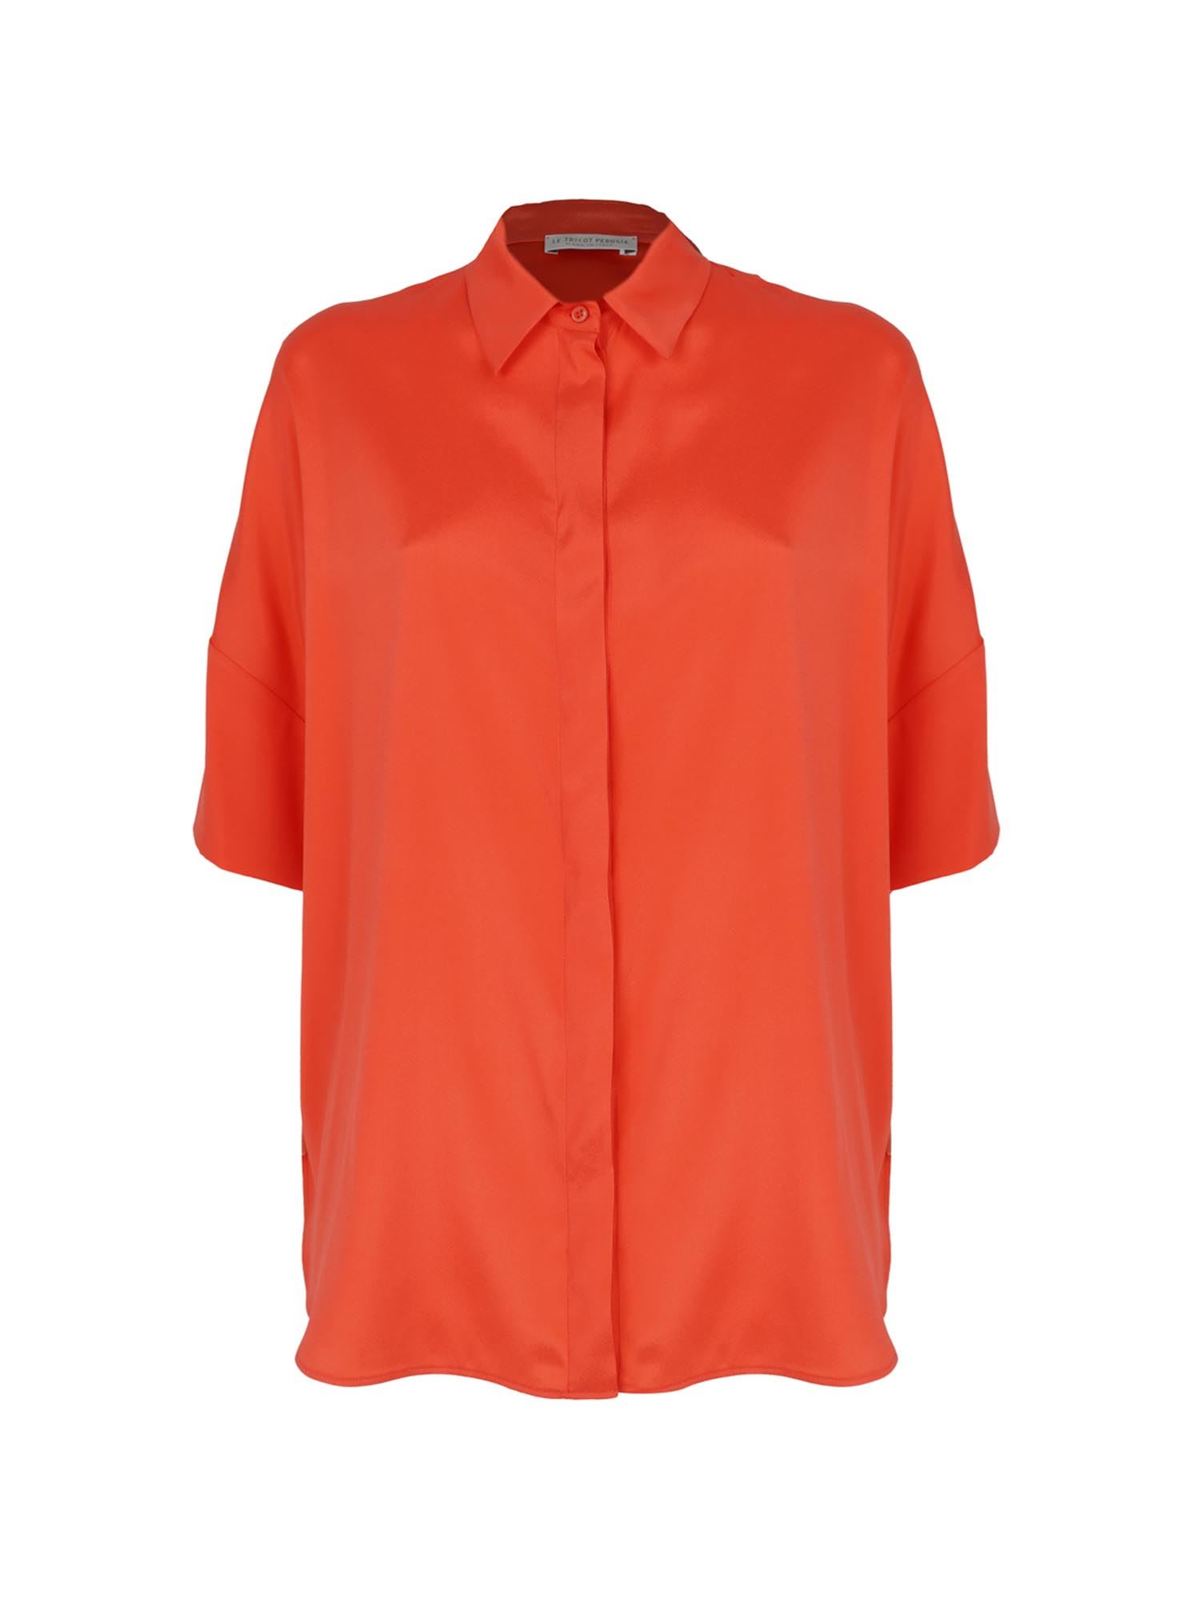 LE TRICOT PERUGIA SHORT-SLEEVED SHIRT IN RED